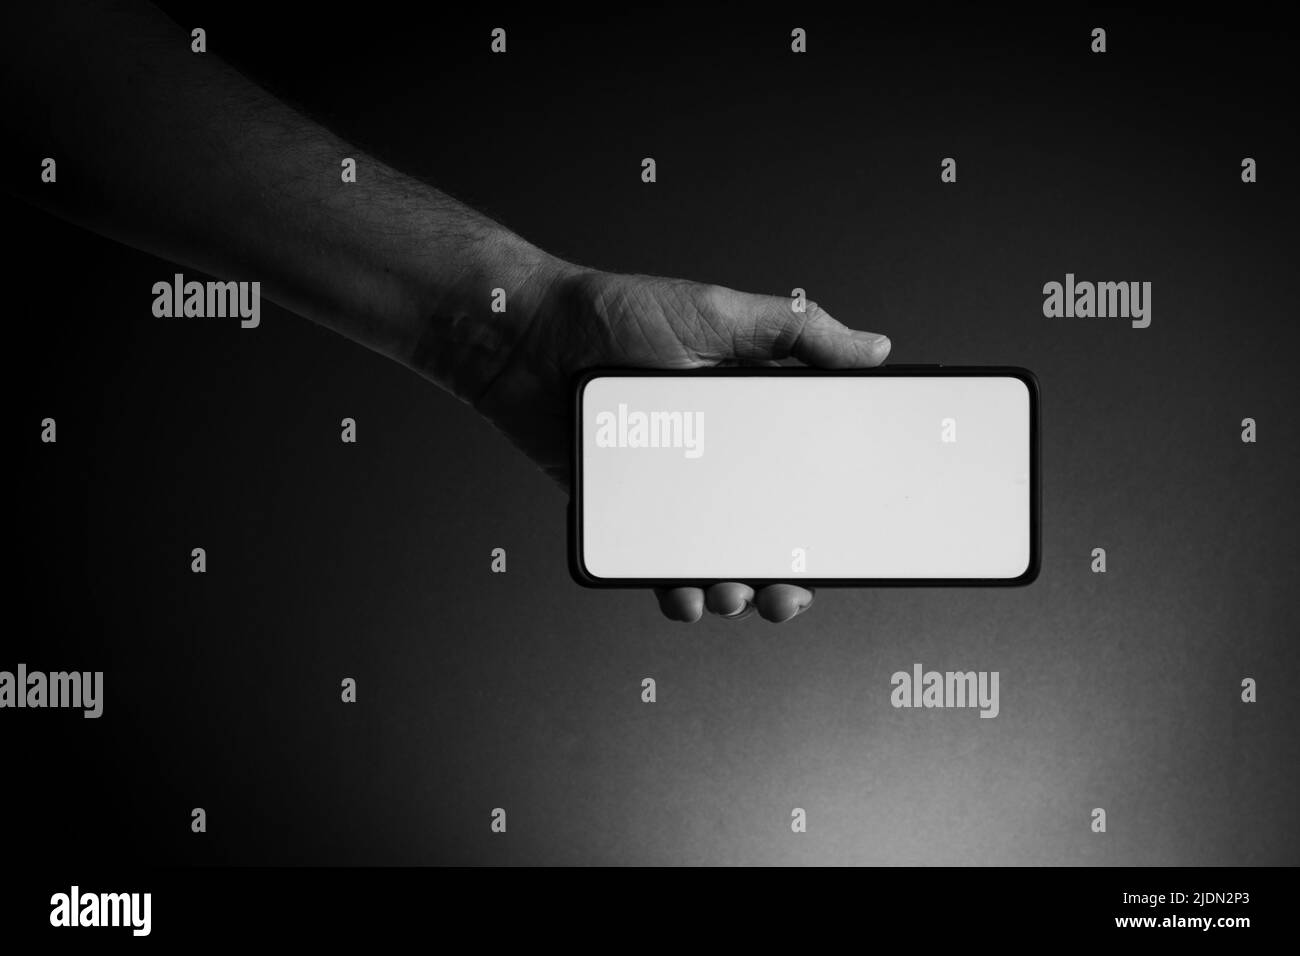 Black and white image of man's hand holding black smartphone horizontally with blank white screen isolated on dark background with dramatic lighting Stock Photo